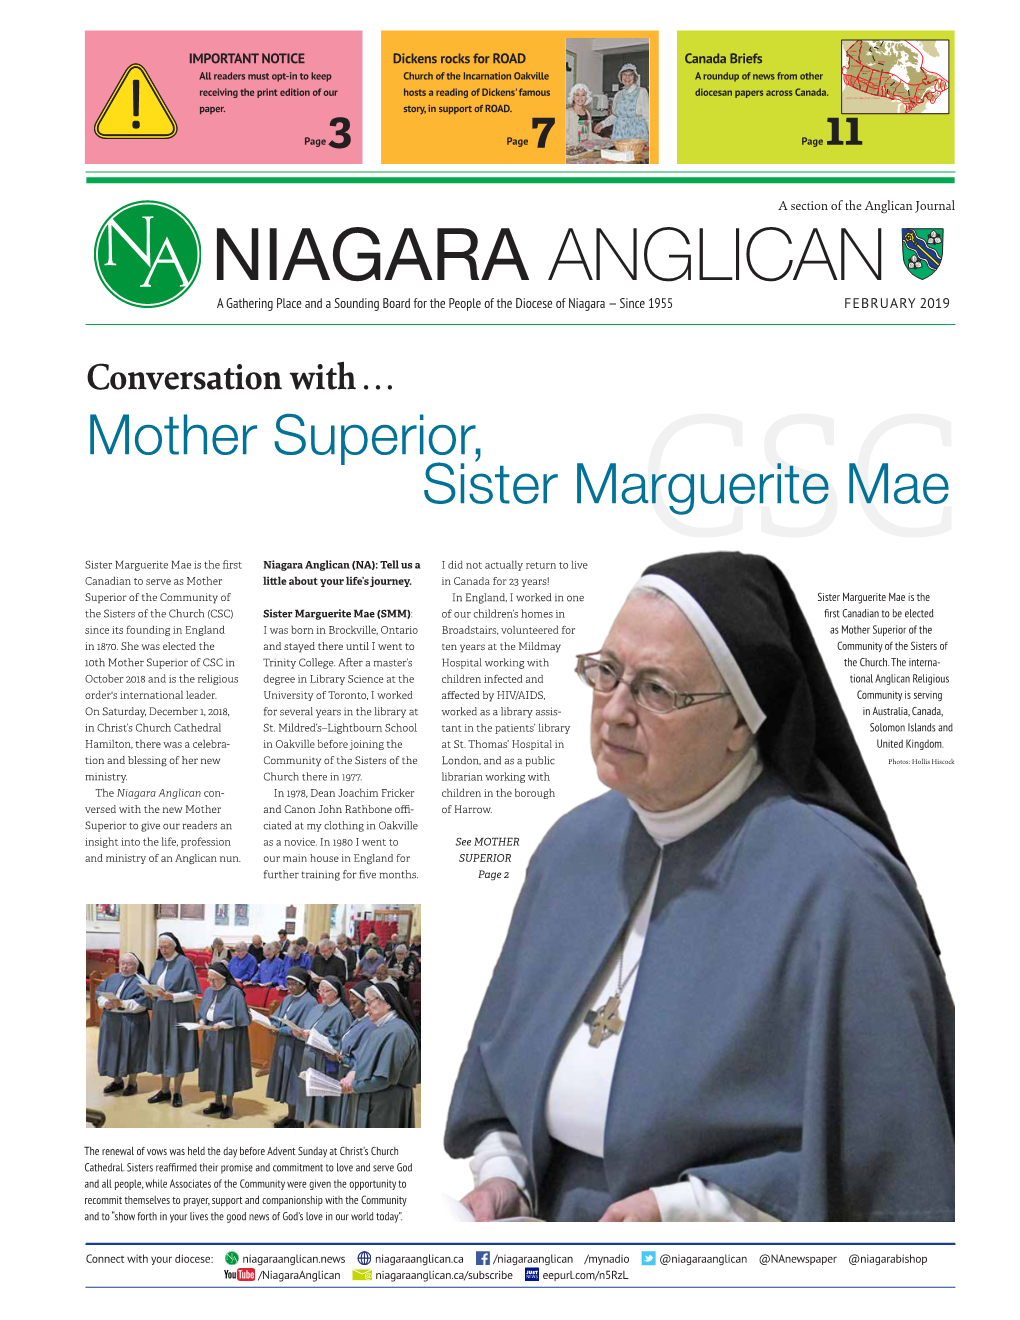 Mother Superior, Sister Marguerite Mae